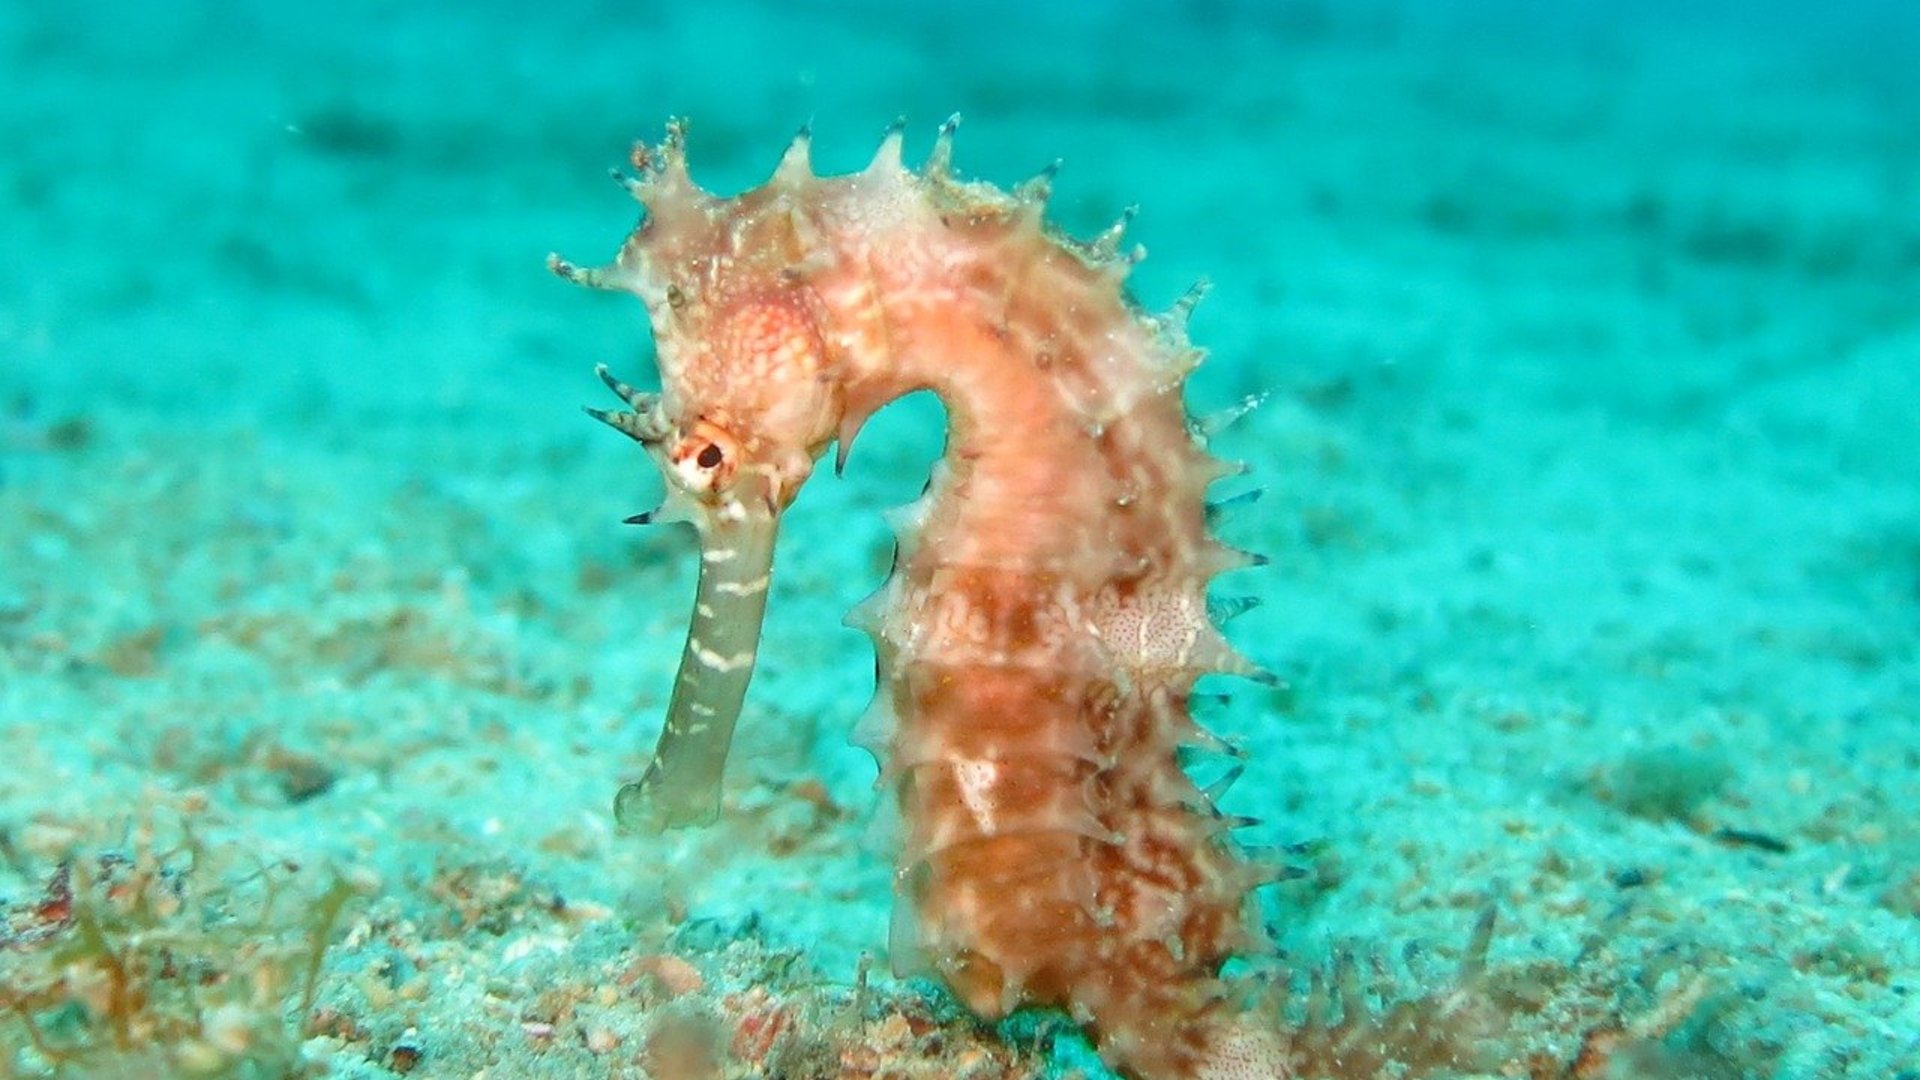 Proposed introduction of seahorses